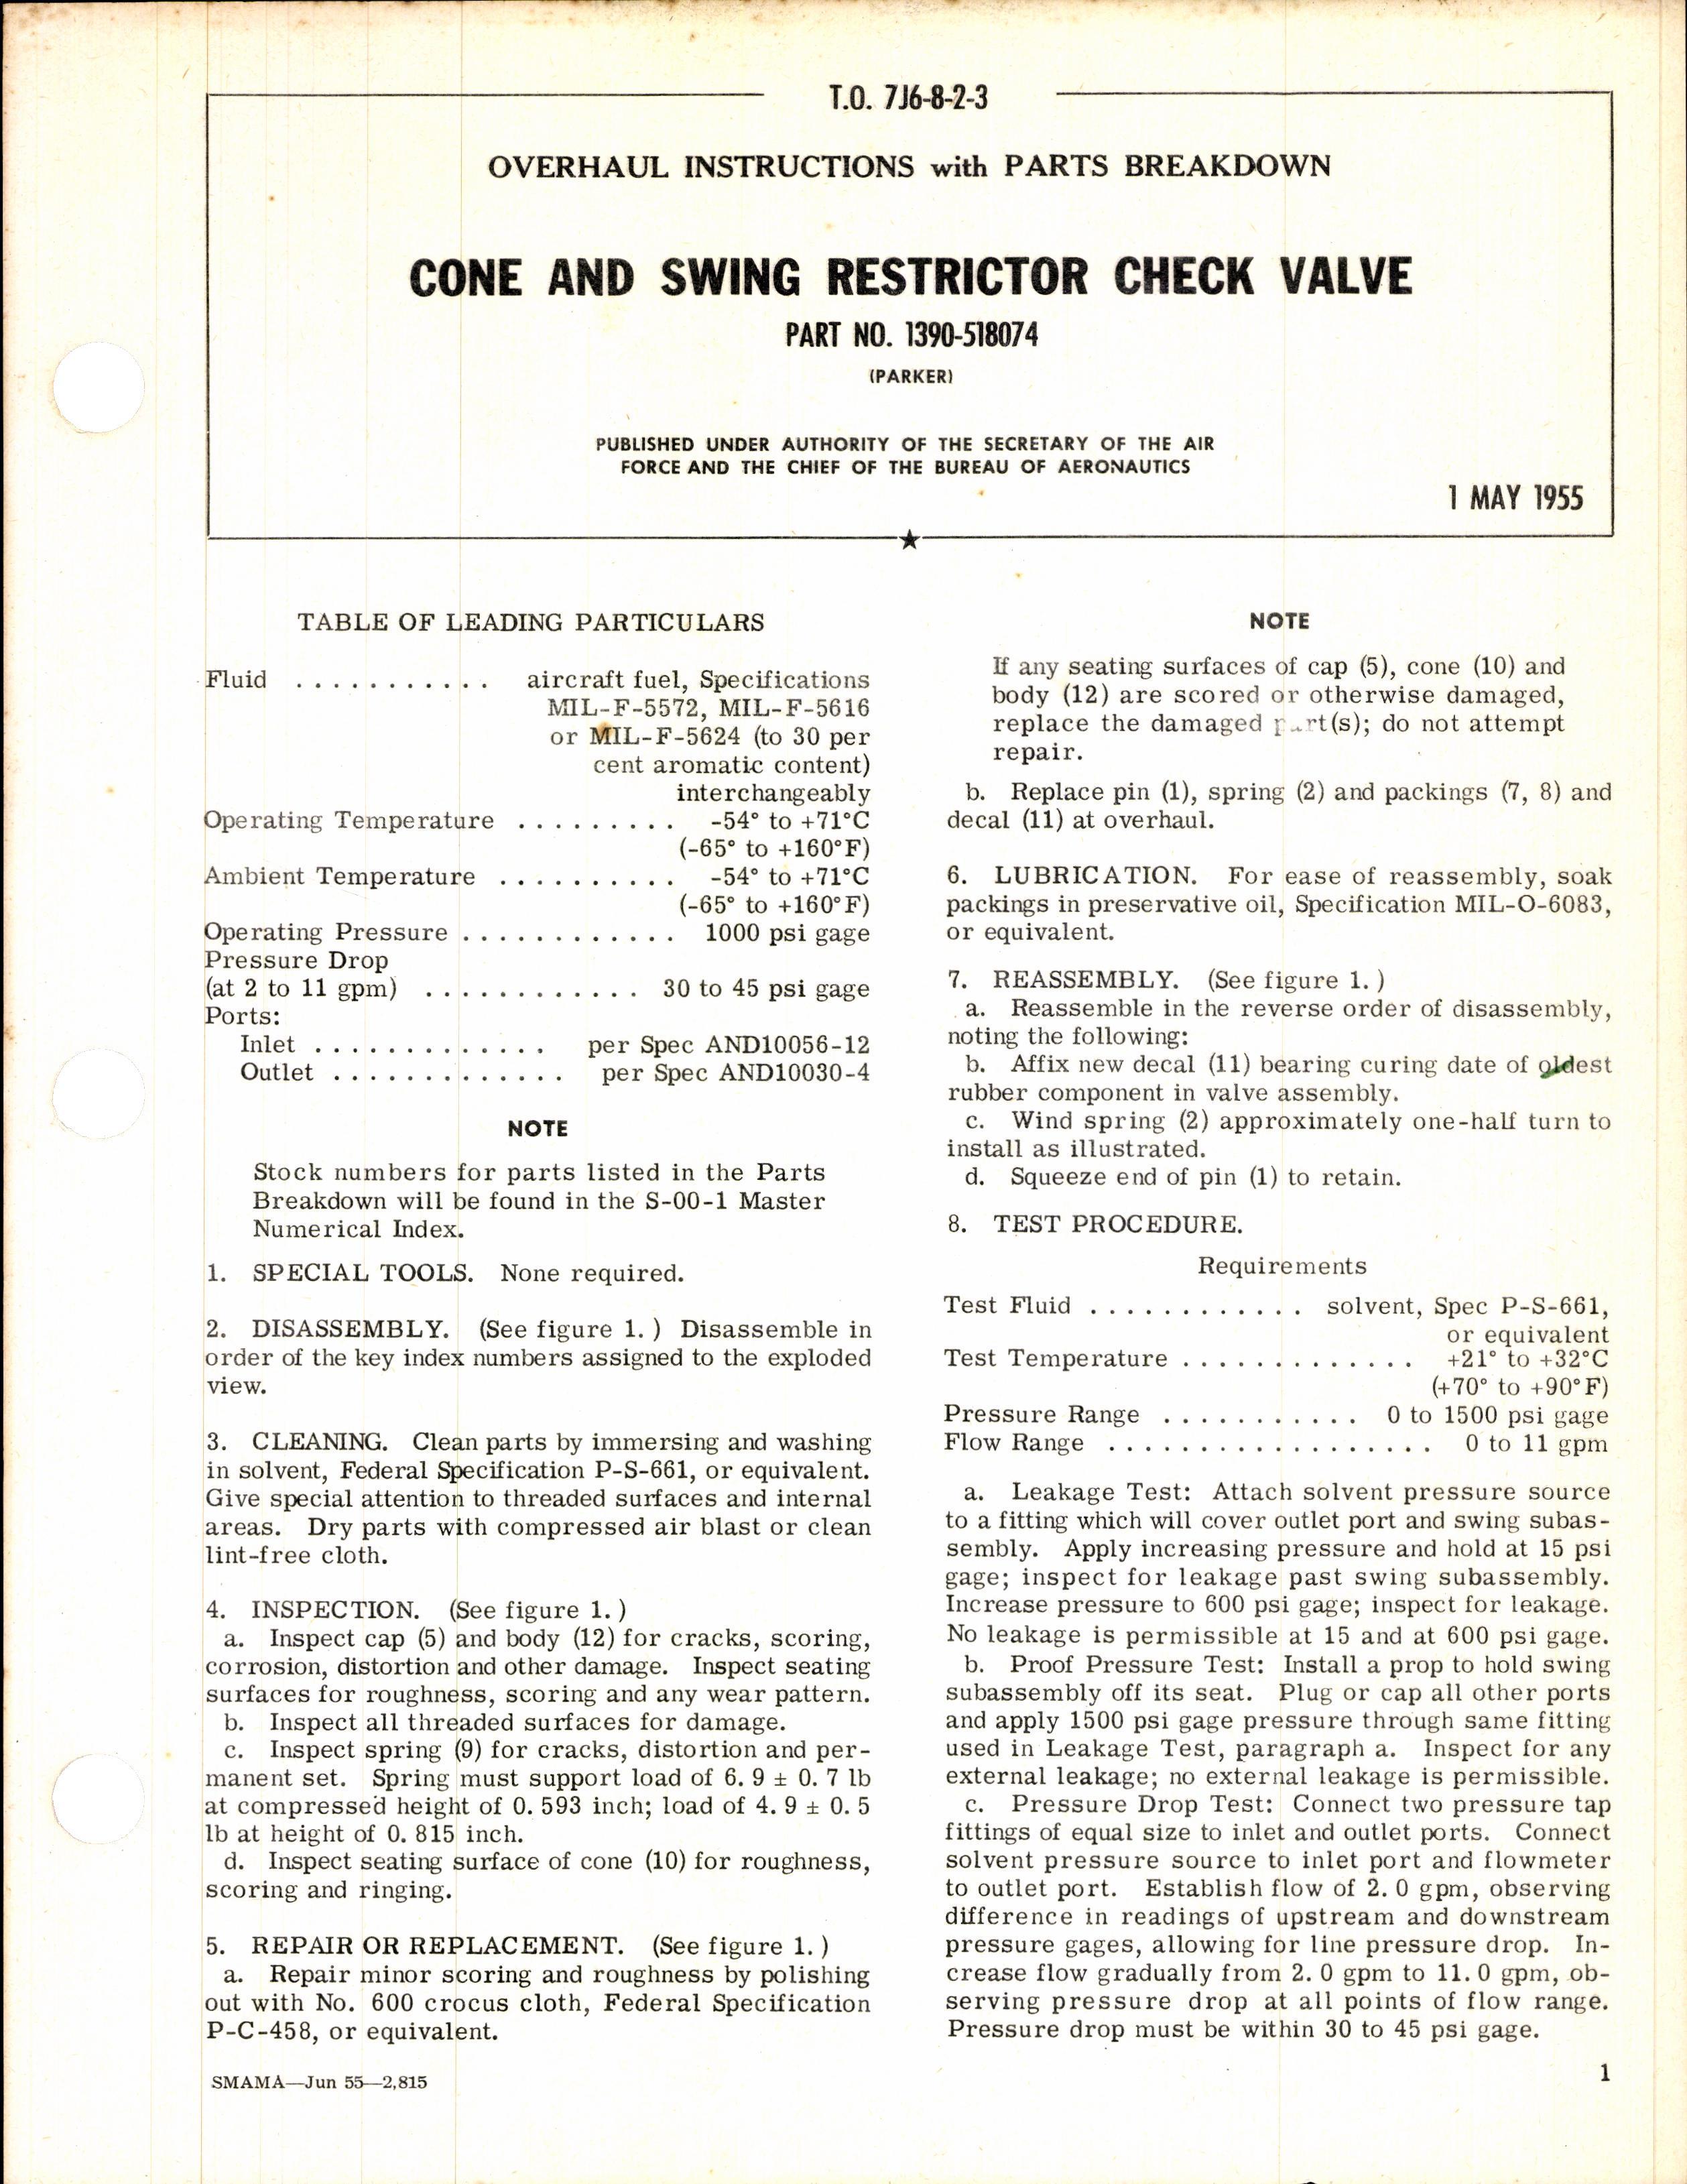 Sample page 1 from AirCorps Library document: Cone and Swing Restrictor Check Valve